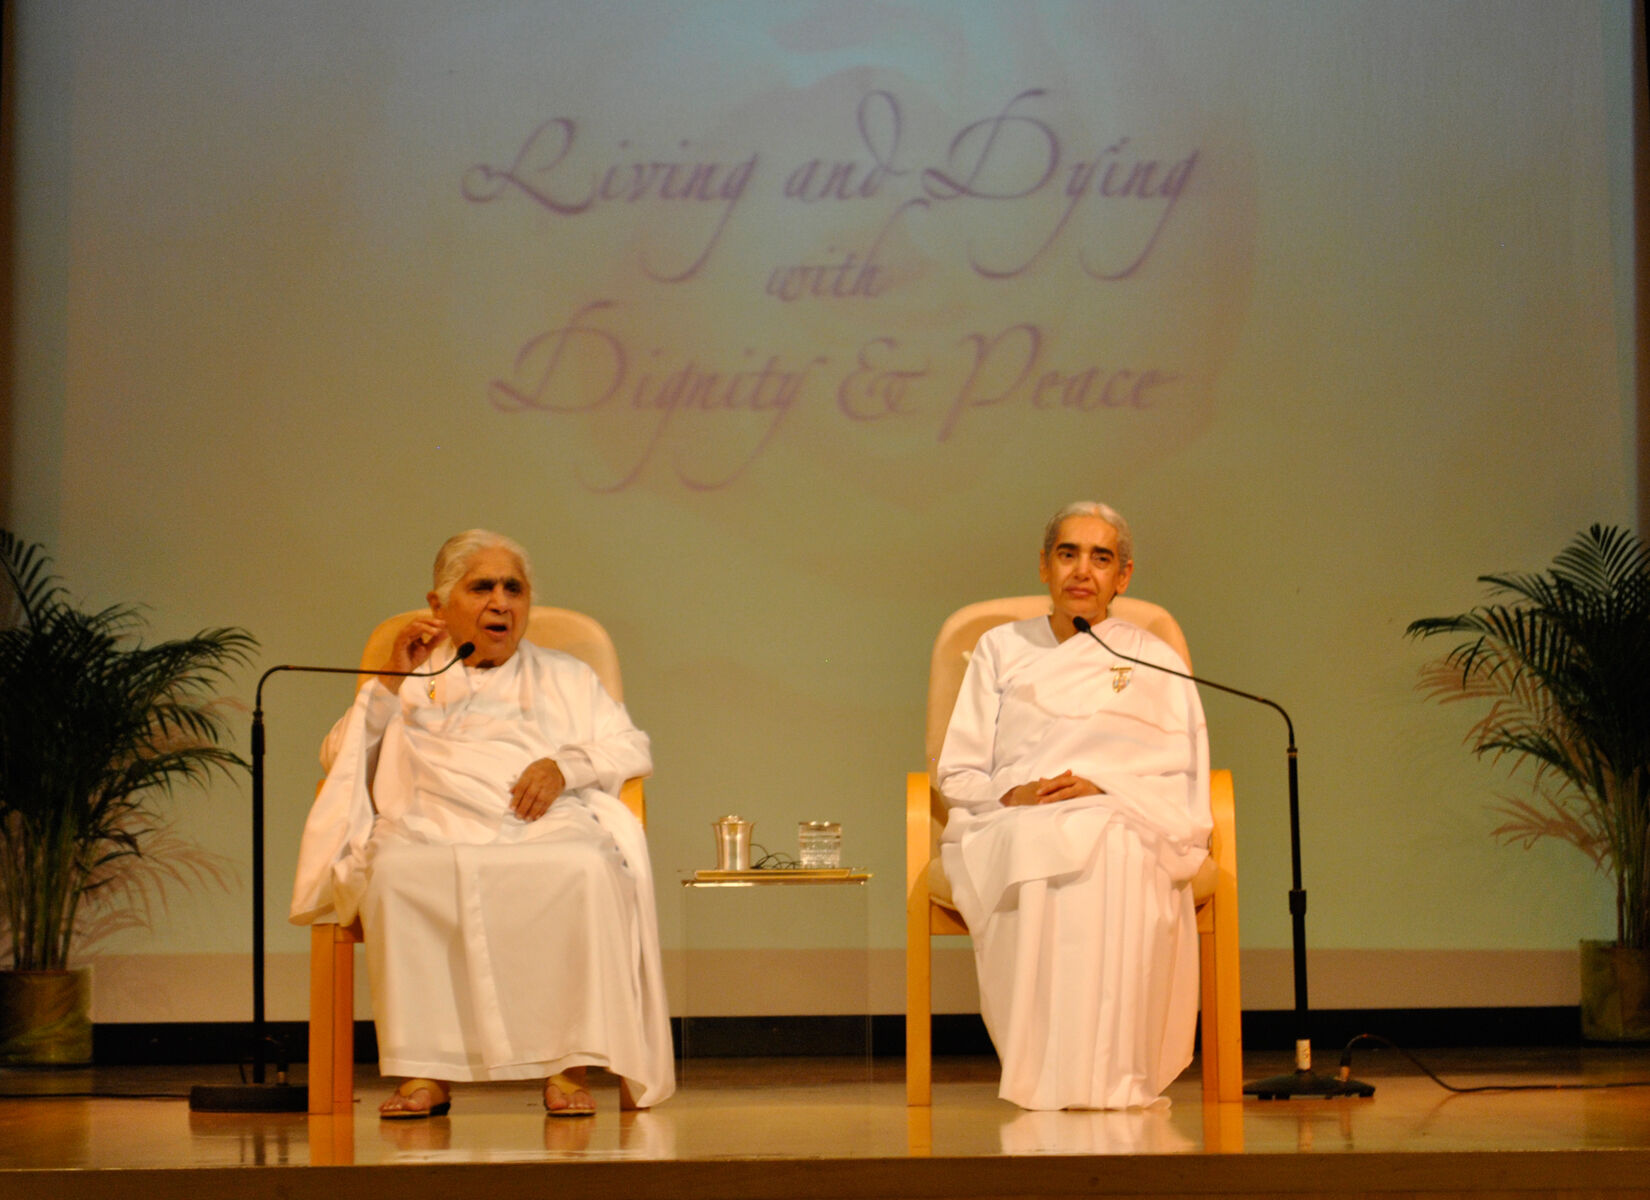 "Living and Dying with Dignity and Fear" with Dadi Janki, 2013